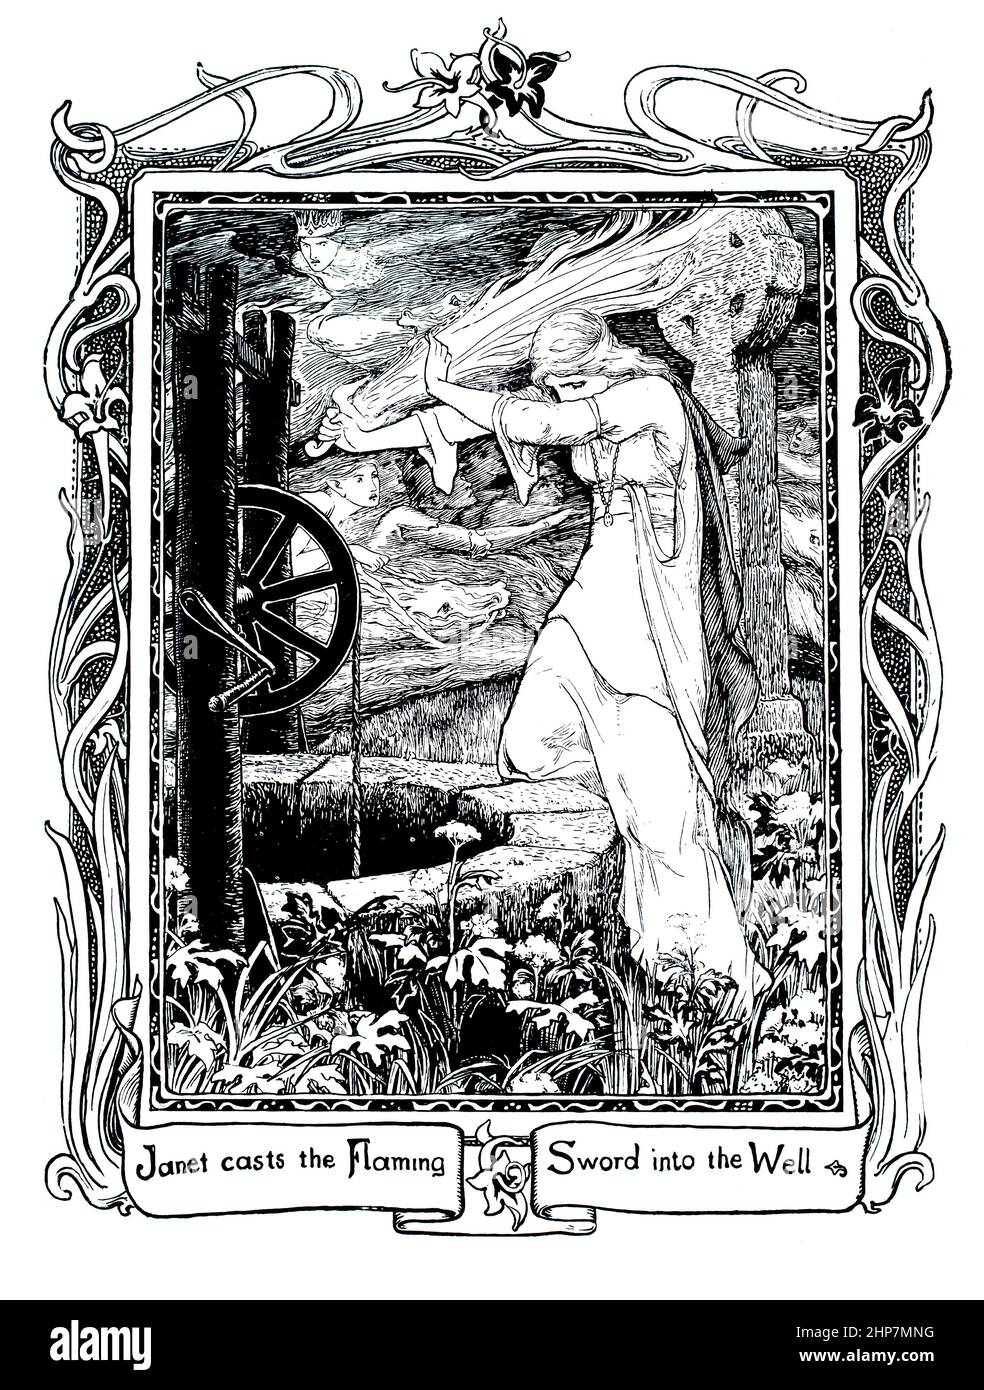 Janet casts the Flaming Sword into the Well,1890 fantasy illustration, by John D Batten, from English Fairy Tales, collected by Joseph Jacobs Stock Photo